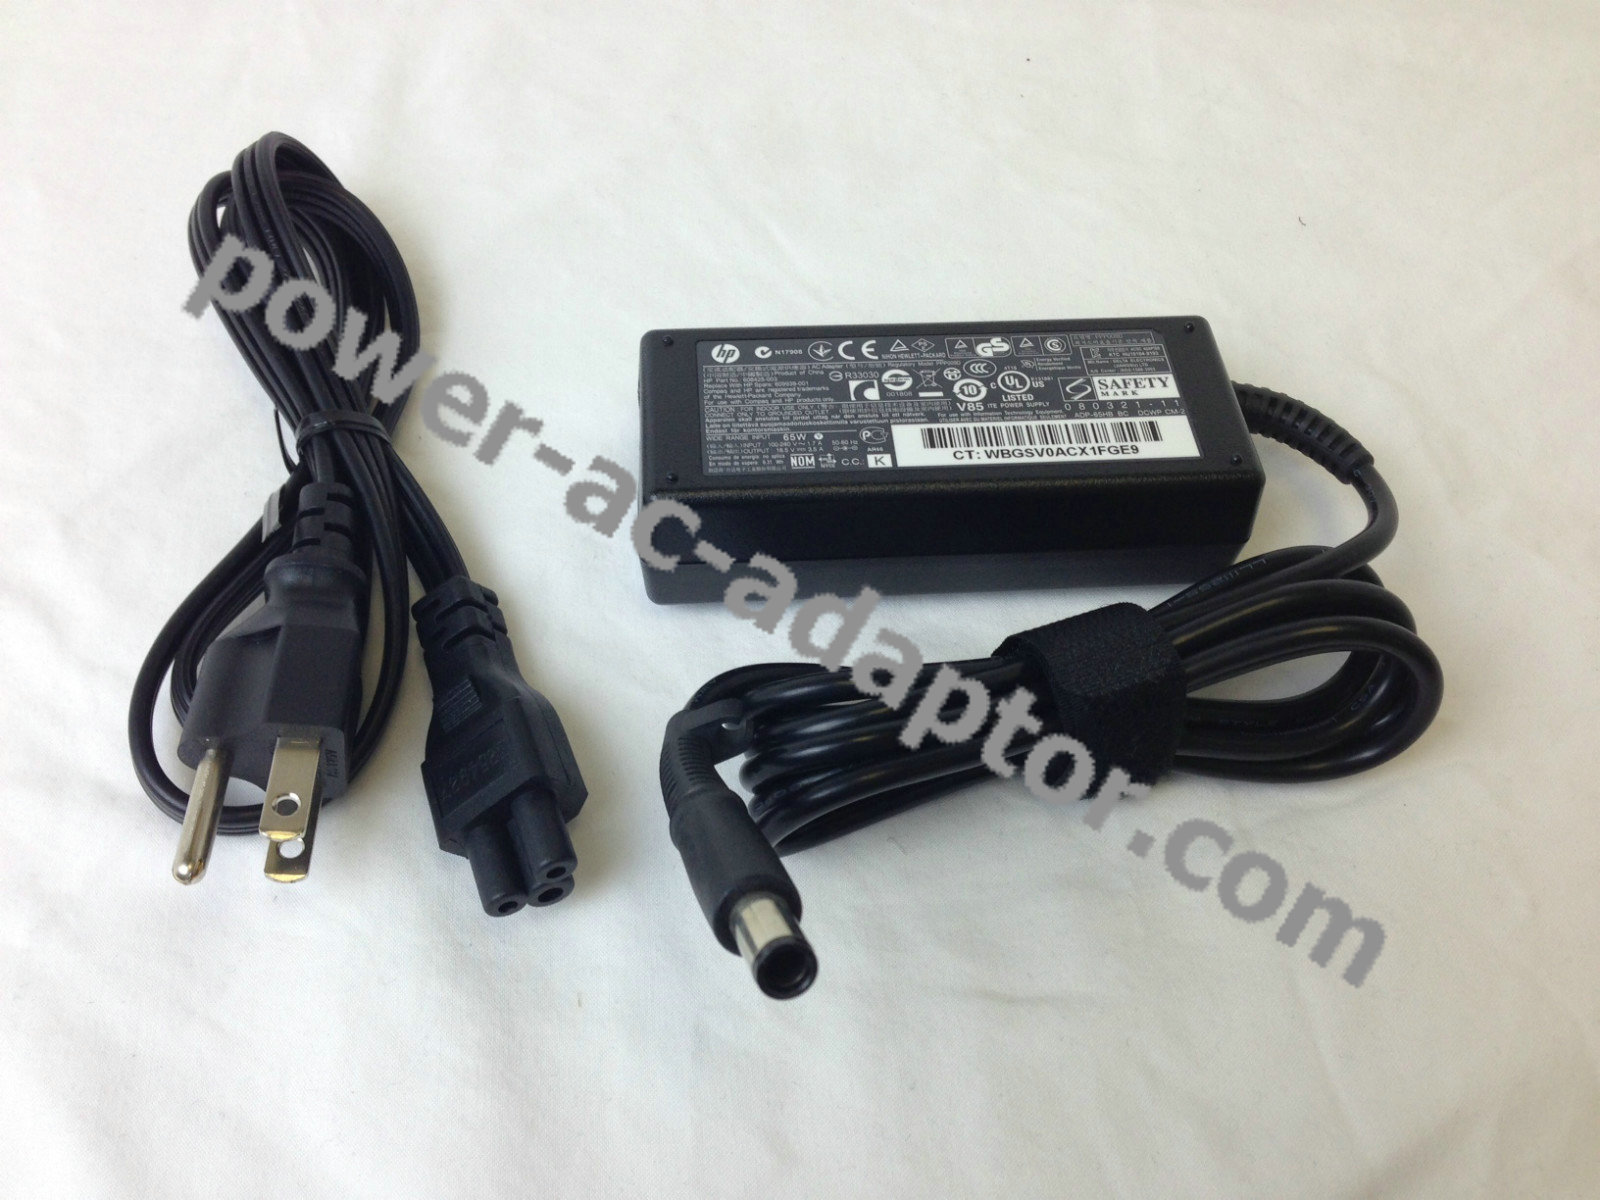 Original AC Adapter For HP 391172-001 PPP009L 384019-001 Laptop